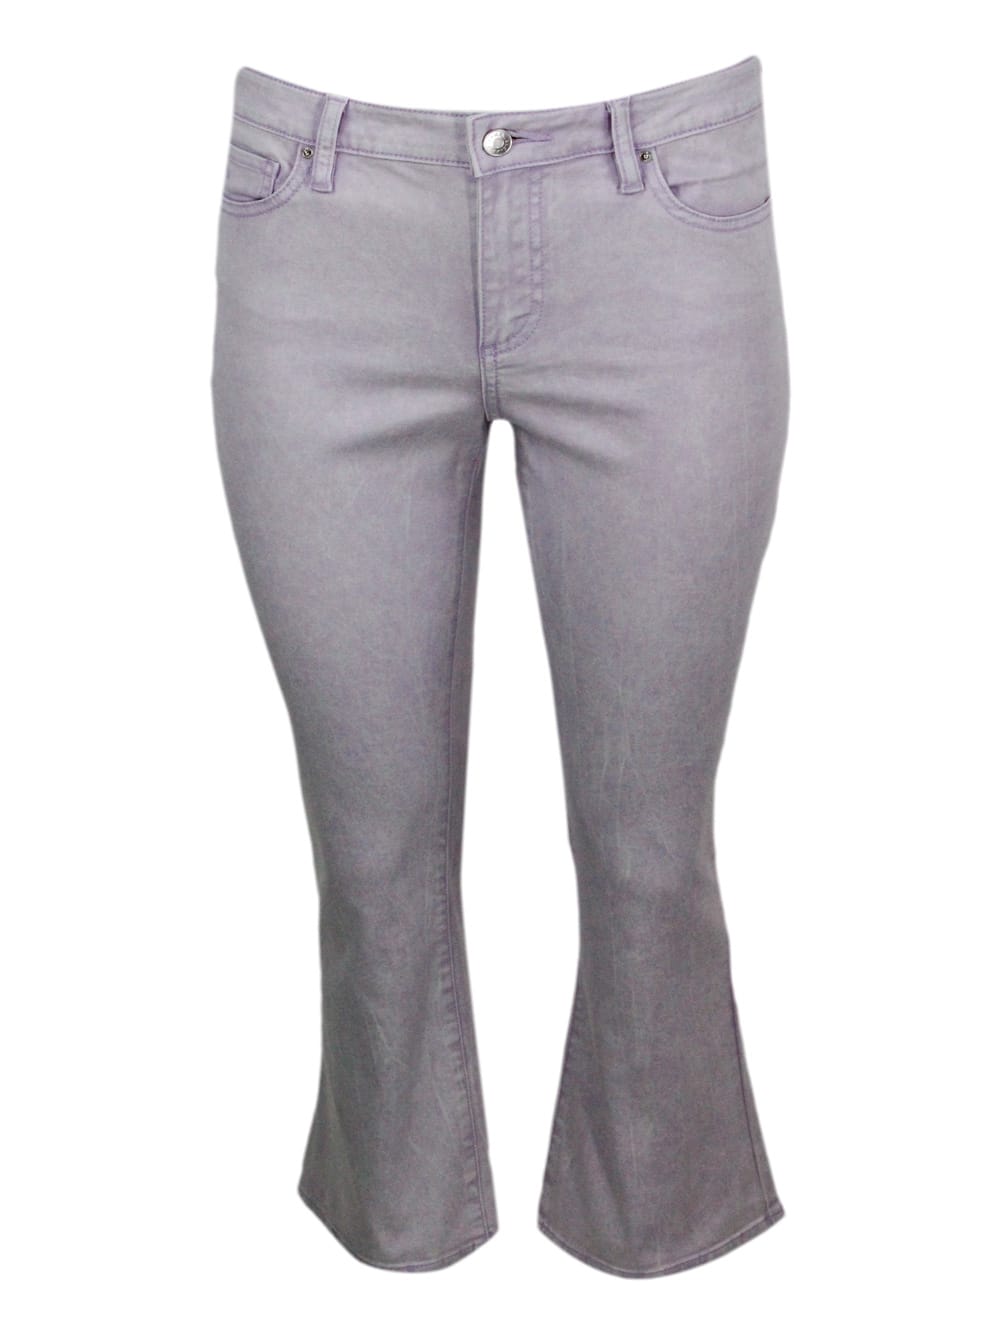 5-pocket Trousers In Faded Stretch Cotton Flare Capri Model With Trumpet Bottom.